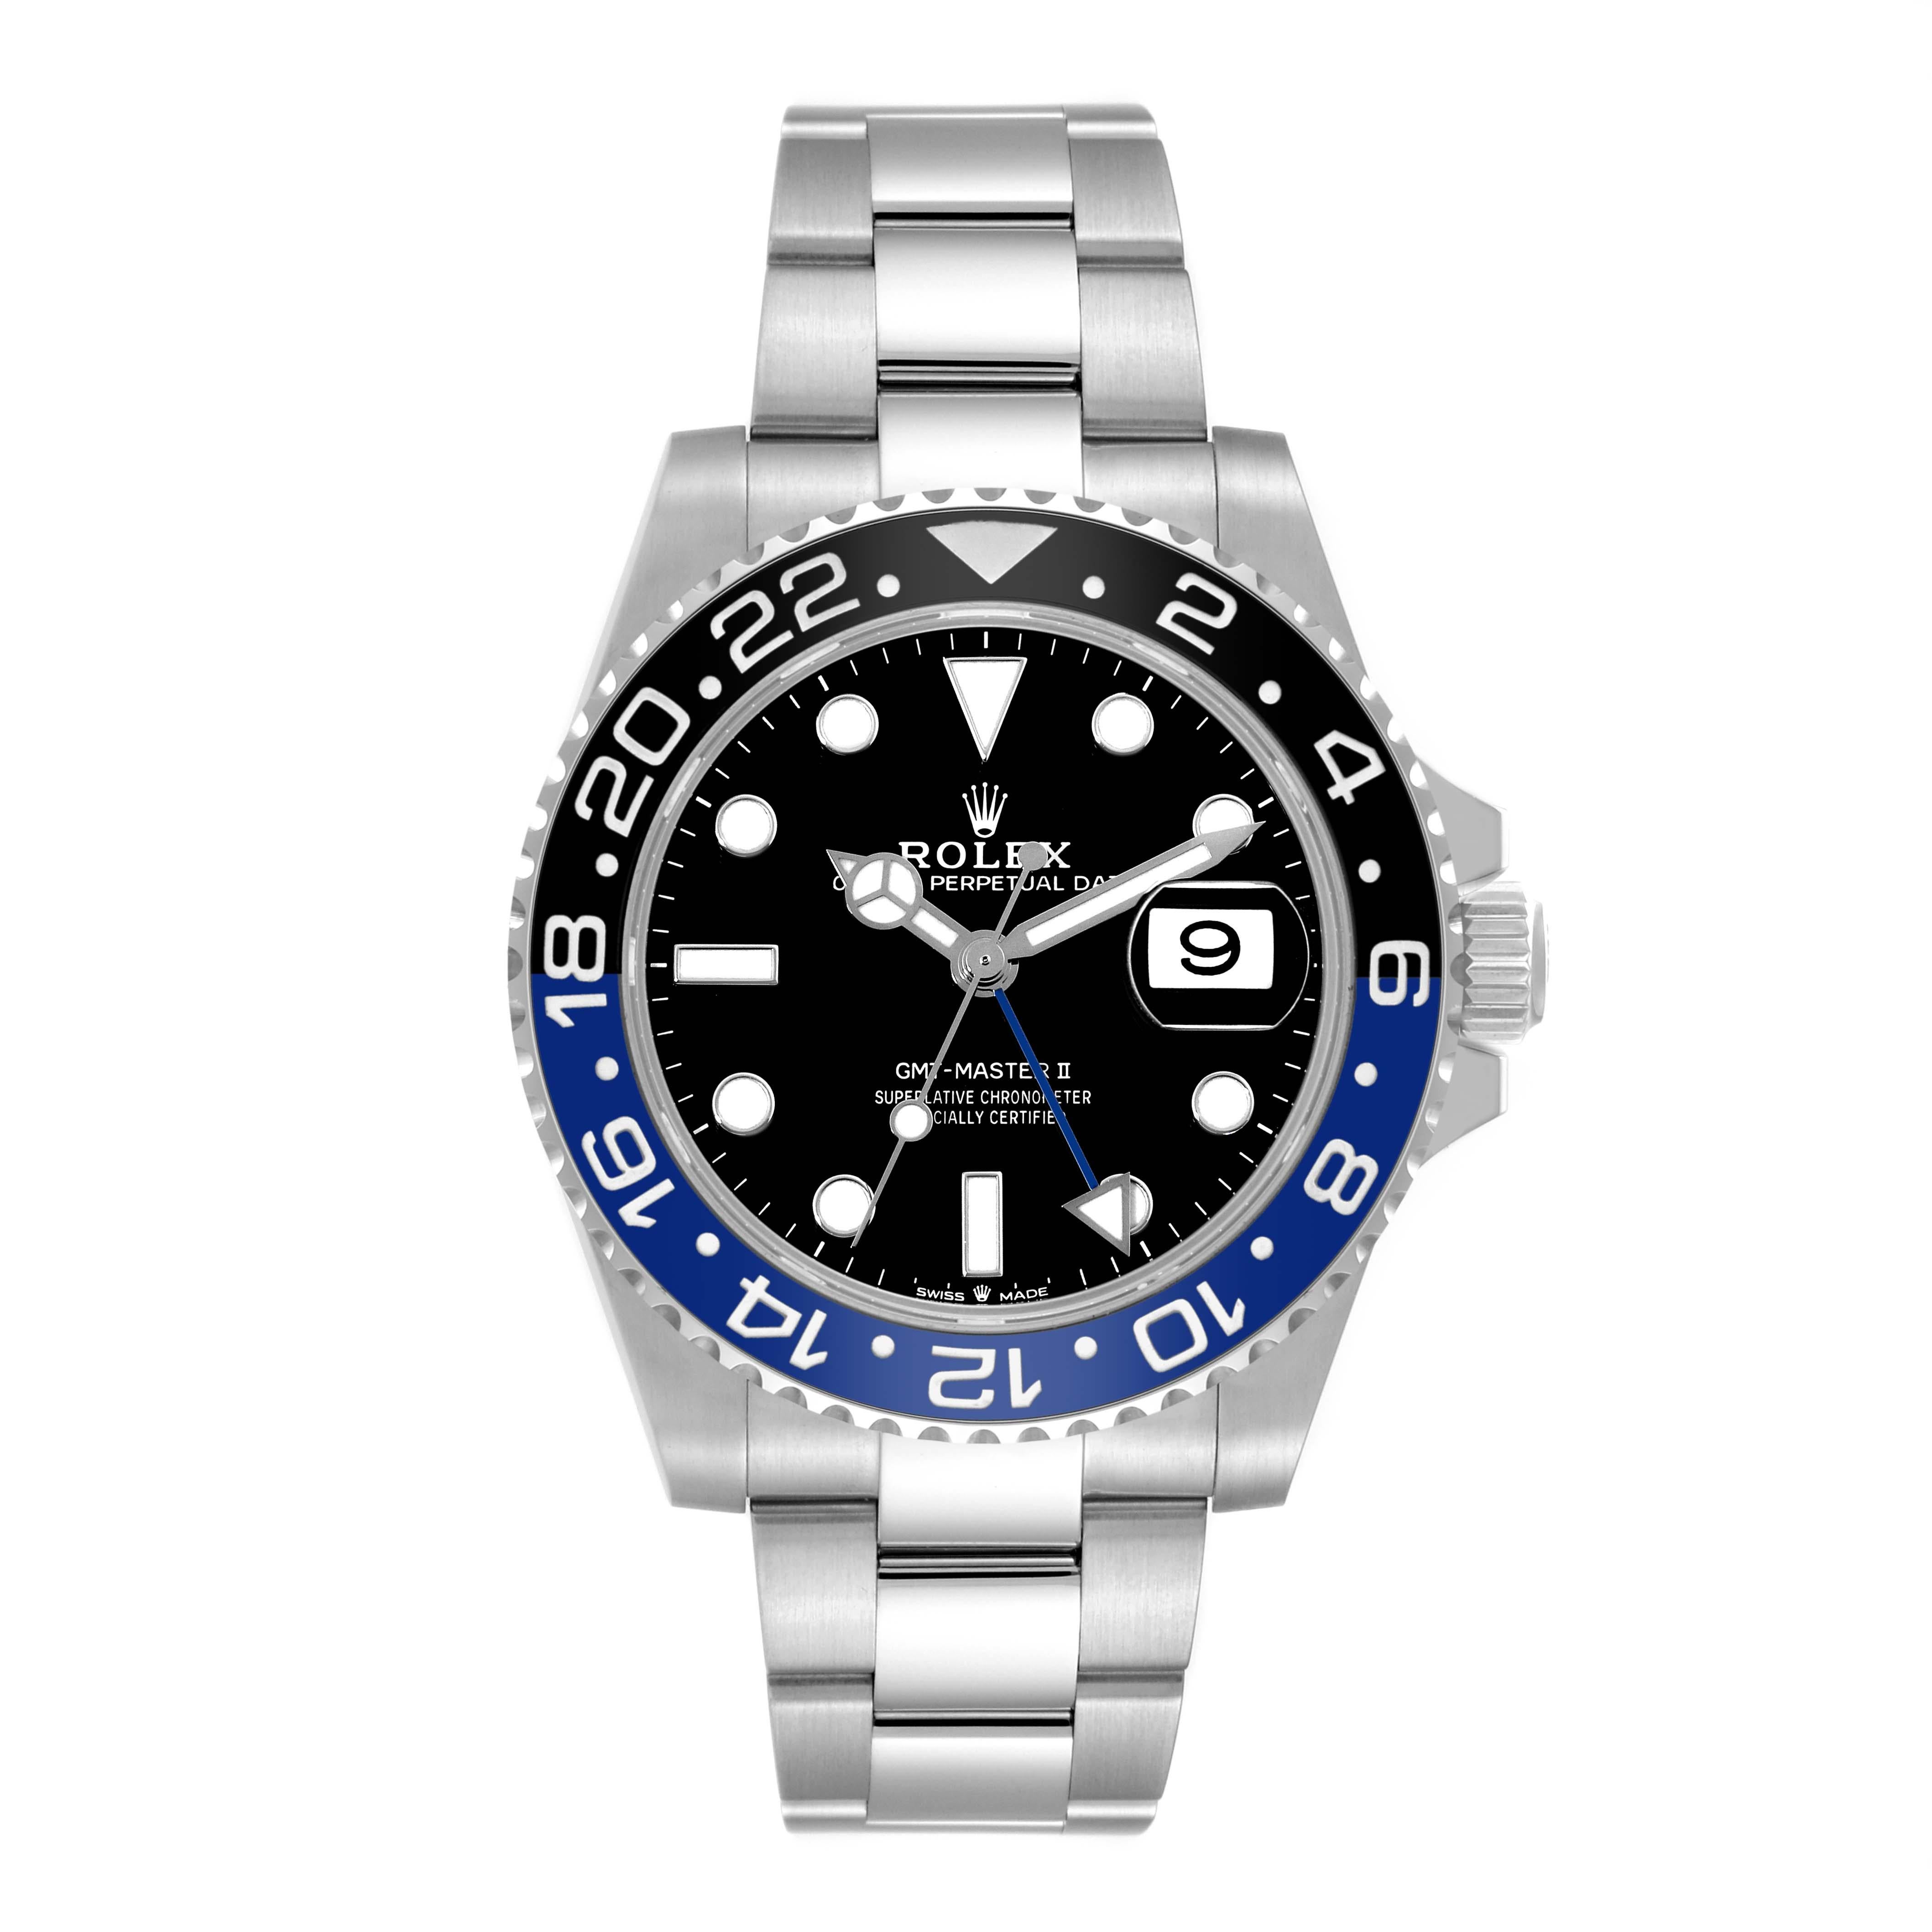 Rolex GMT Master II Black Blue Batman Bezel Steel Mens Watch 126710 Box Card. Officially certified chronometer automatic self-winding movement. Stainless steel case 40 mm in diameter. Rolex logo on the crown. Stainless steel bi-directional rotating